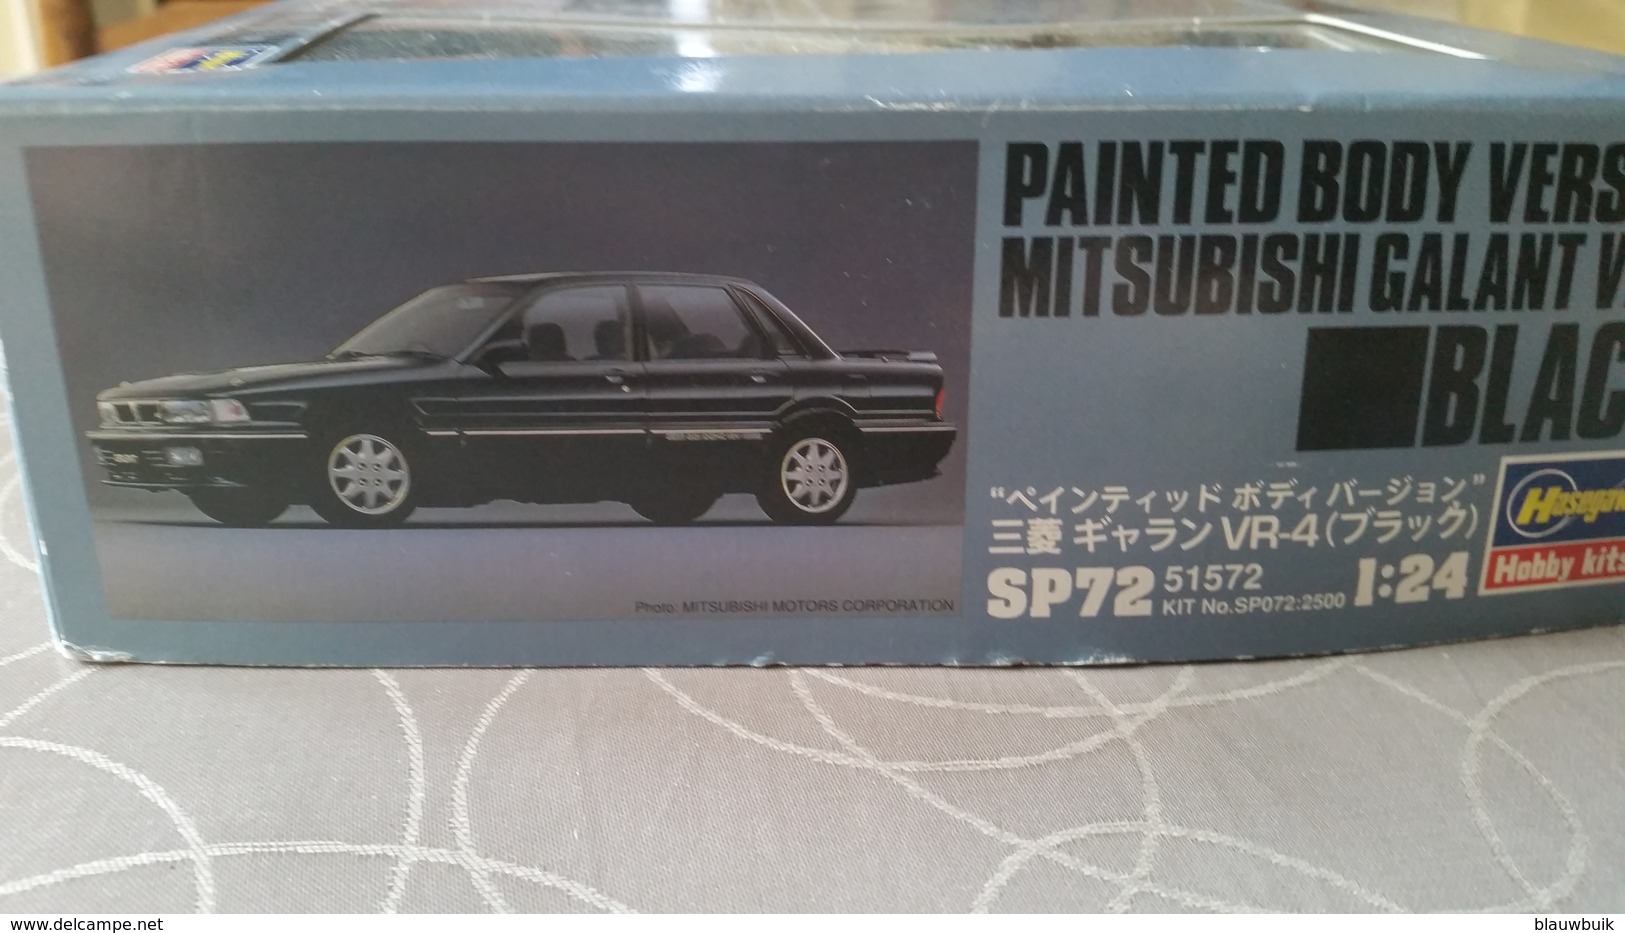 50-sp72 hasegawa sp72 1/24-galant vr-4 black painted